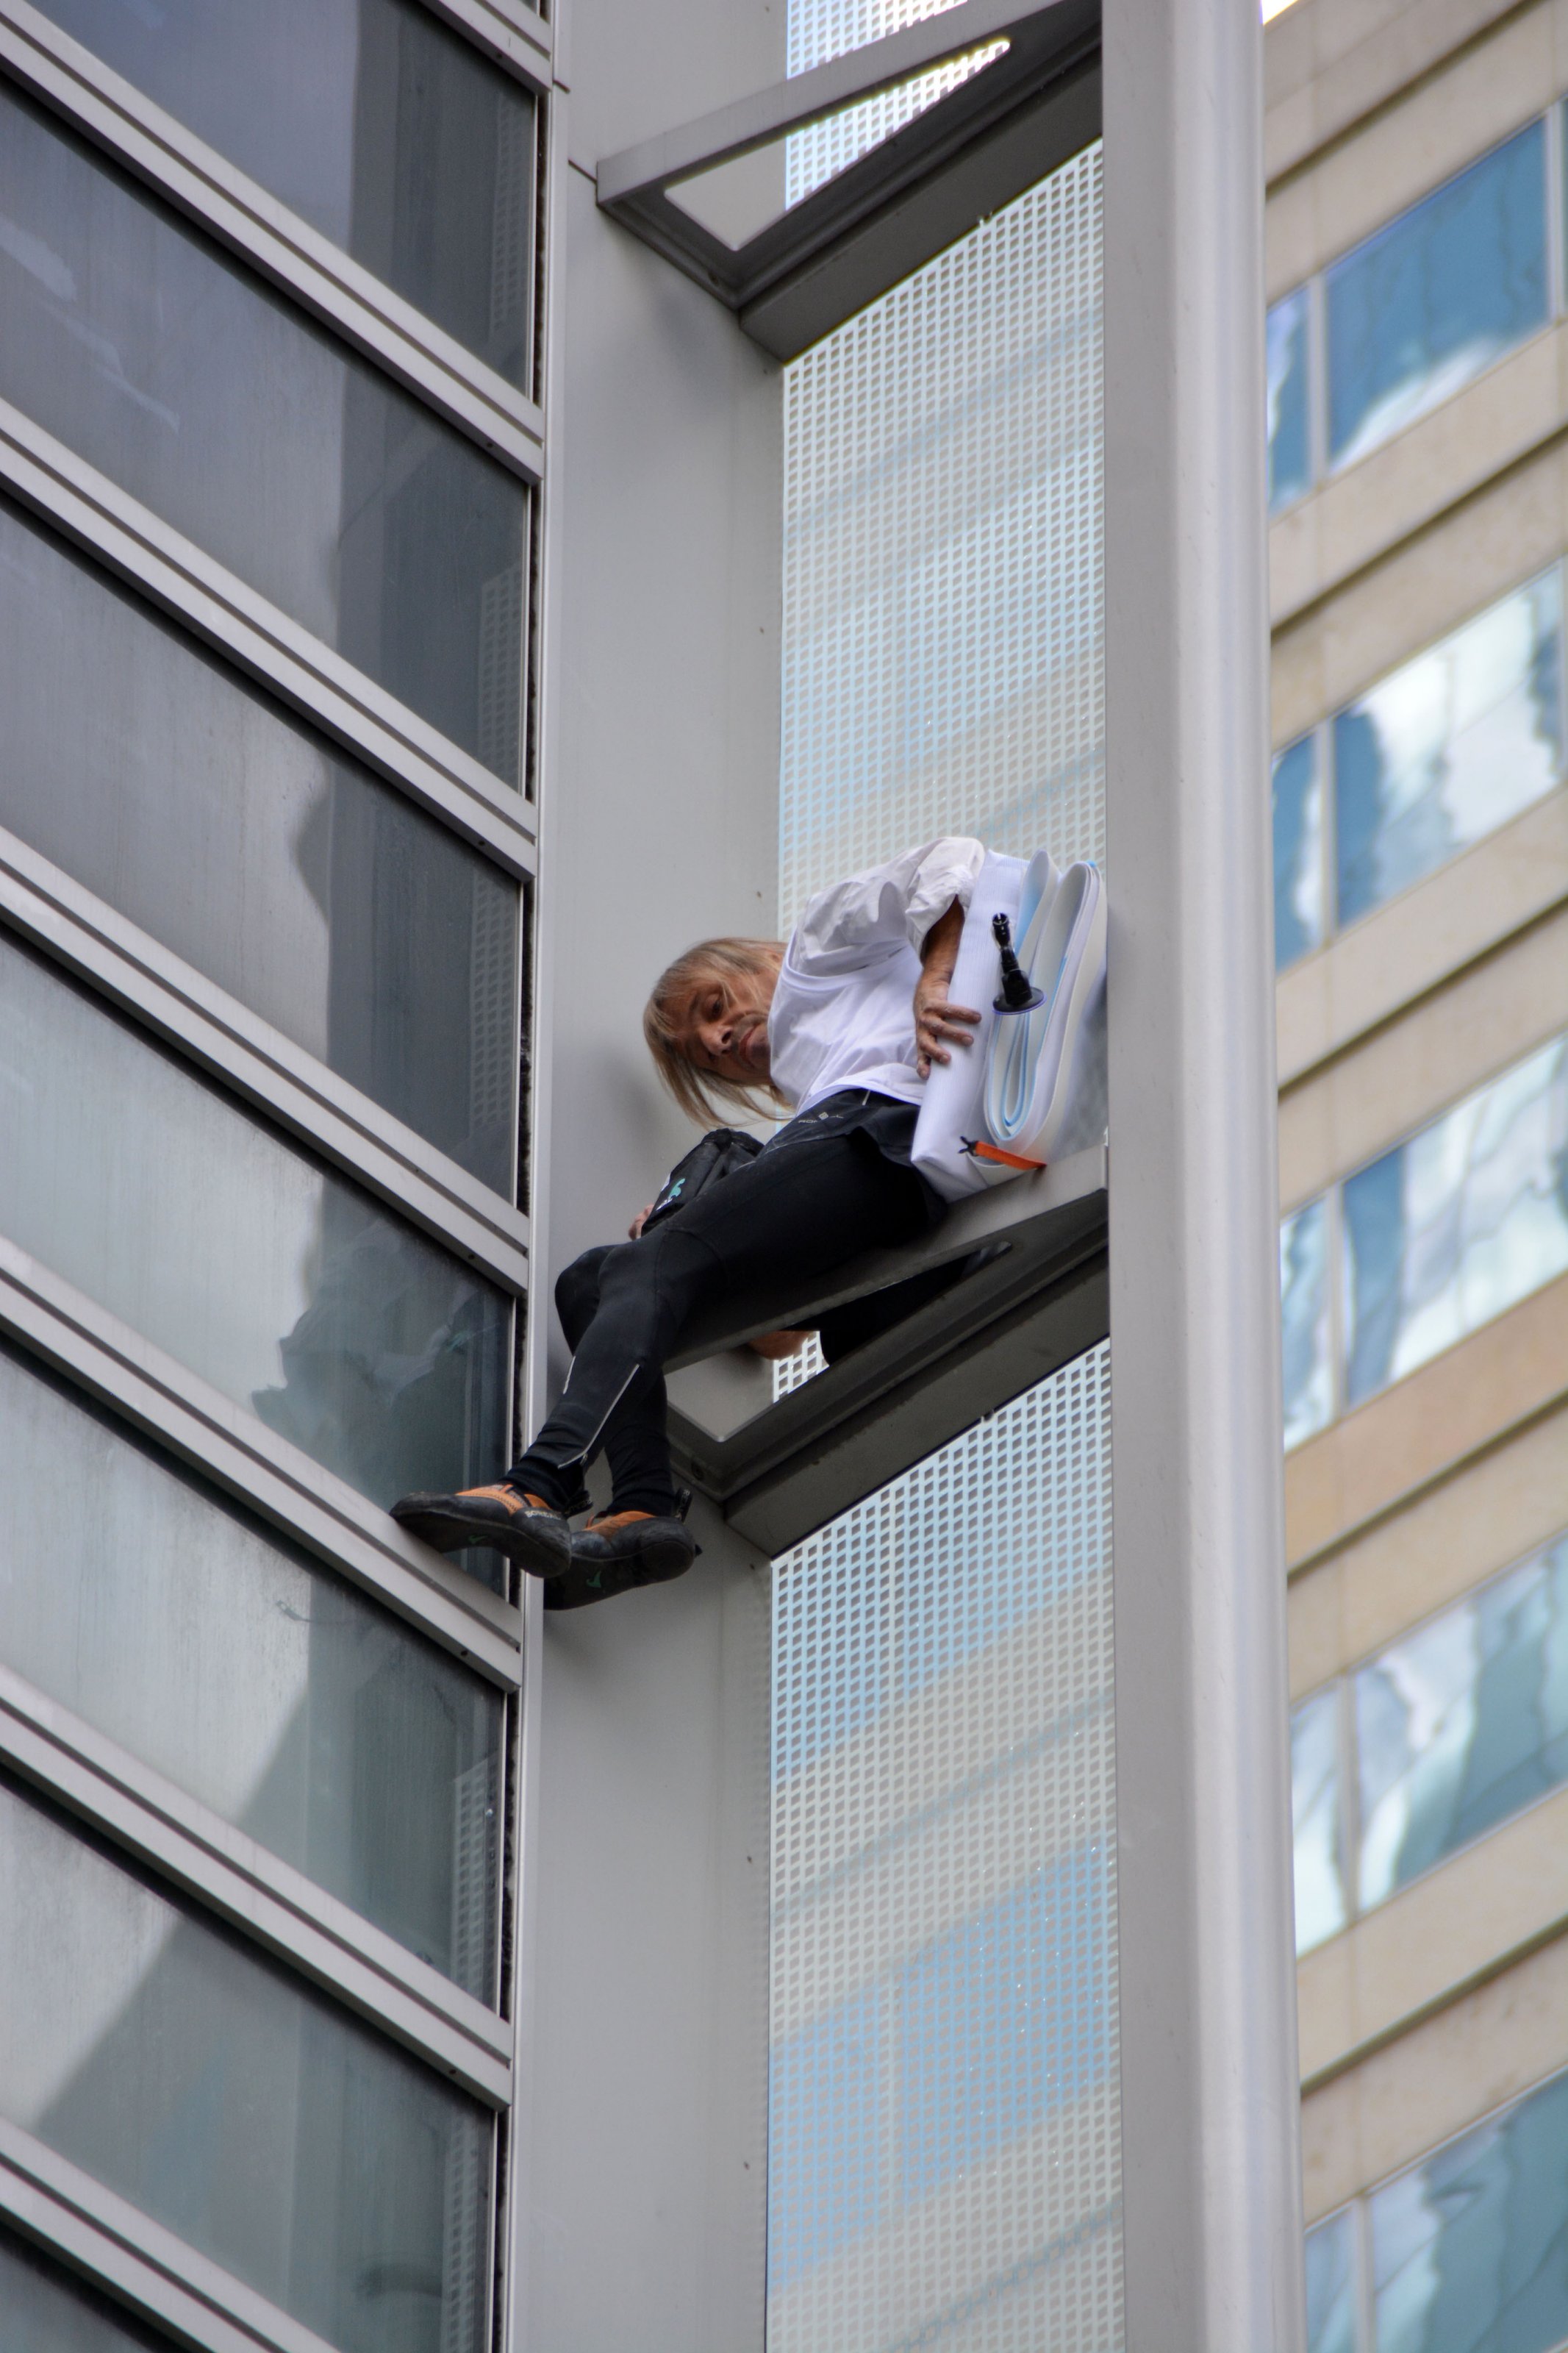 French urban climber Alain Robert nicknamed 'Spiderman' climbing French energy group Engie's building At La Defense business district in Nanterre suburb of Paris, France on September 23, 2015. Photo by Thierry Plessis/ABACAPRESS.COM